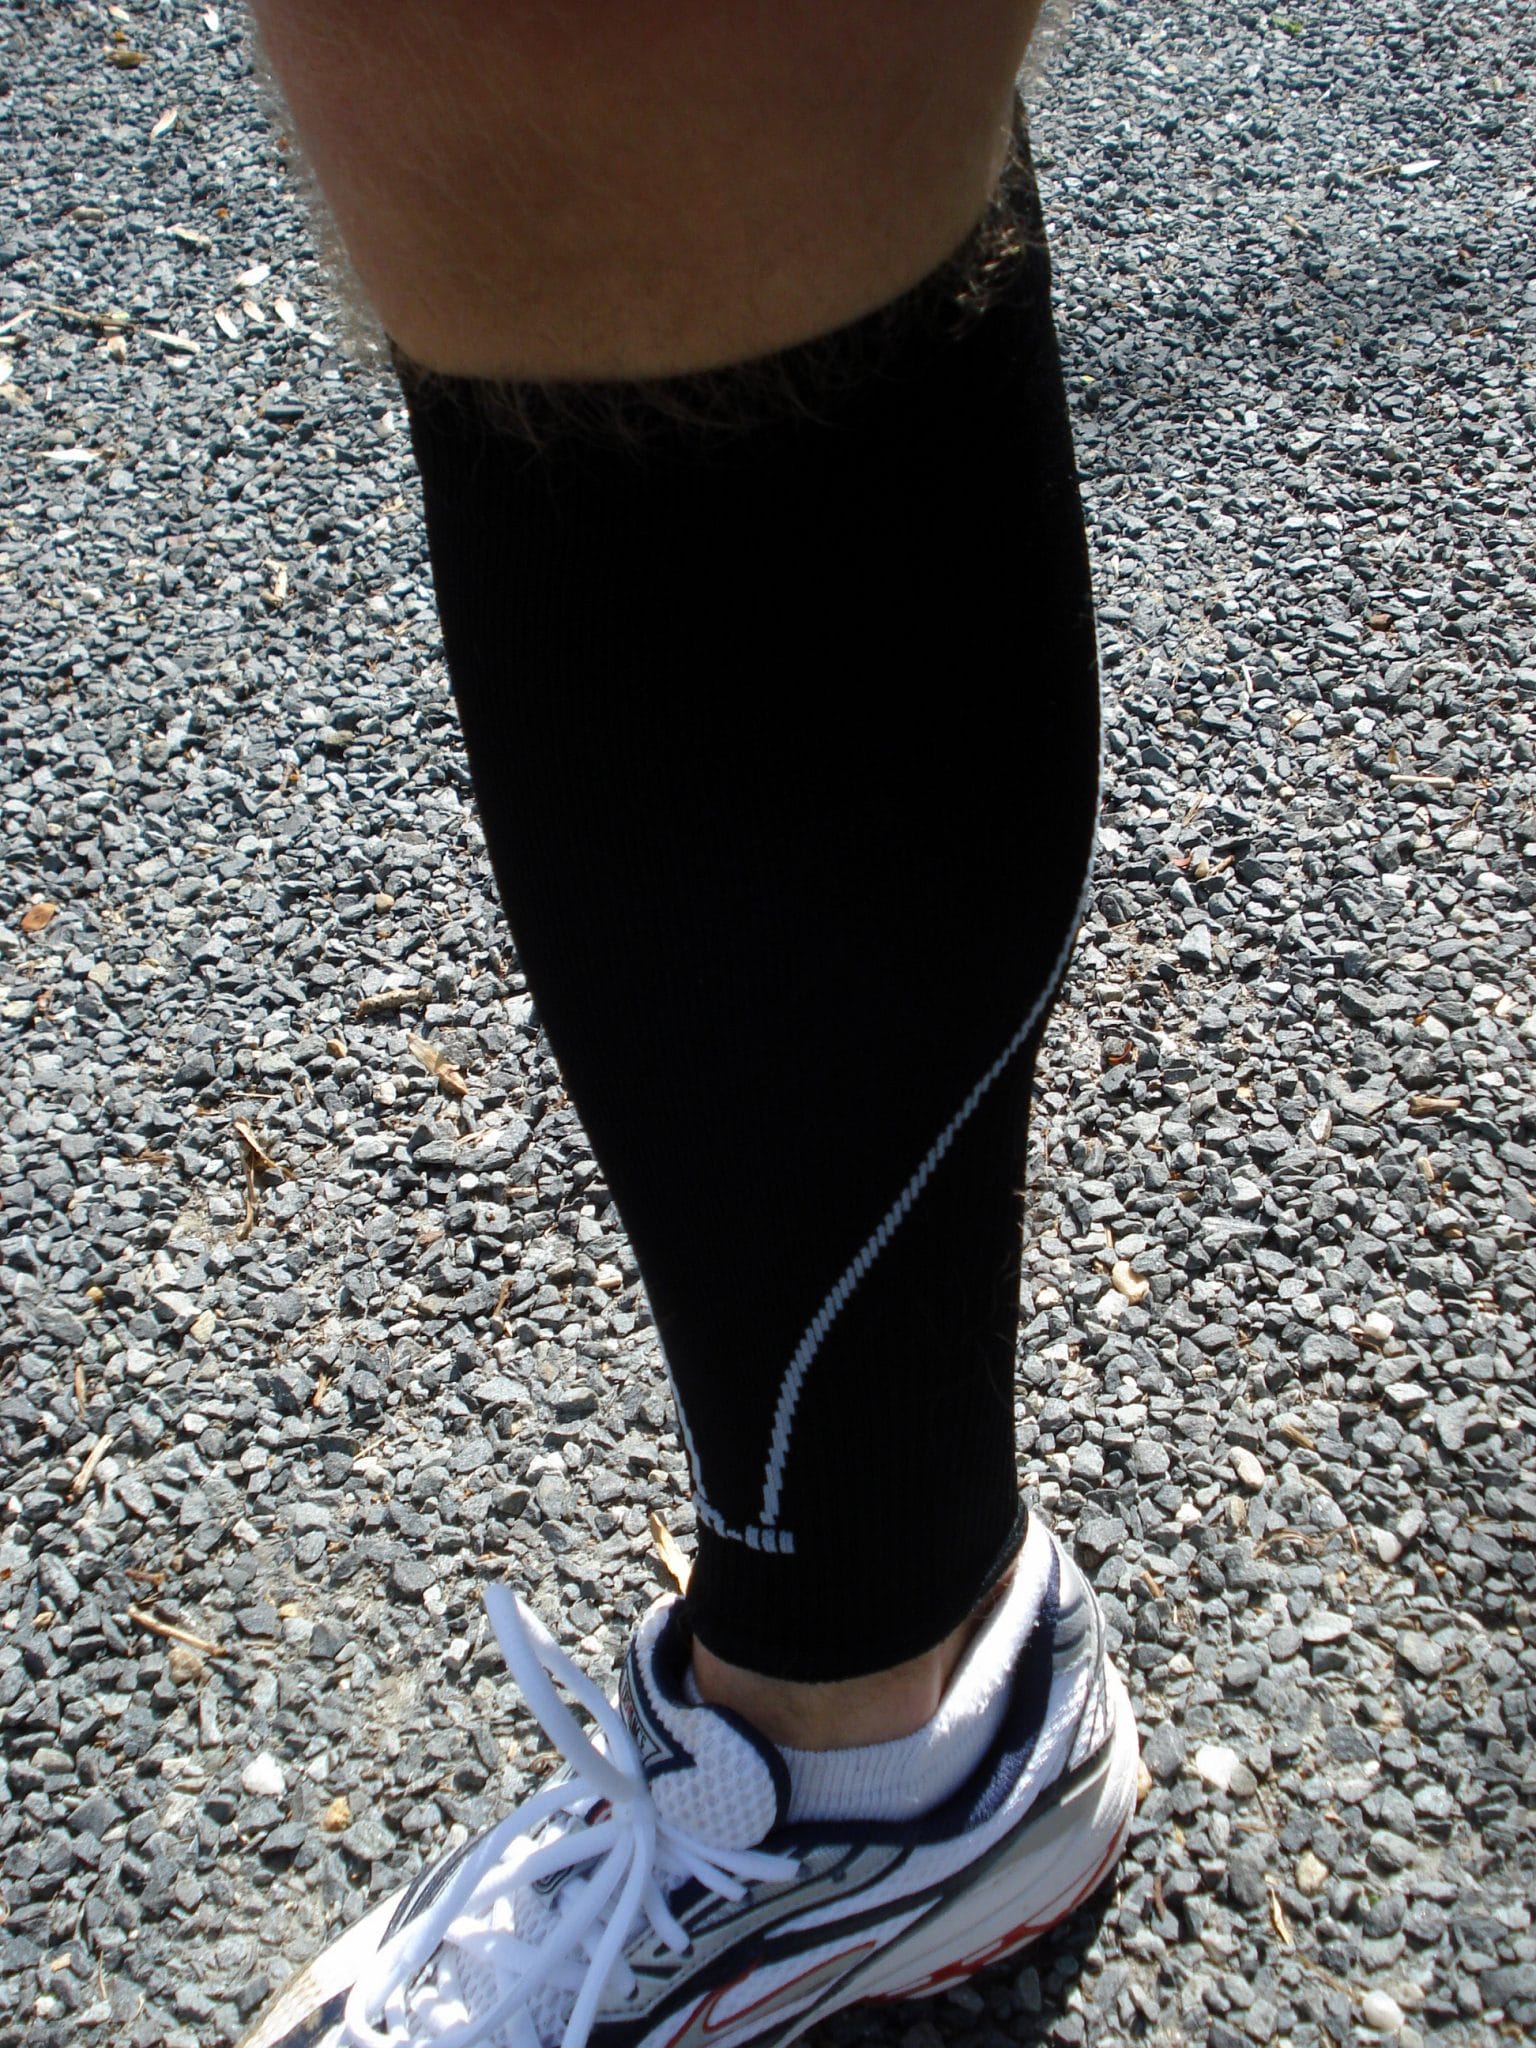 CEP Compression Socks Review